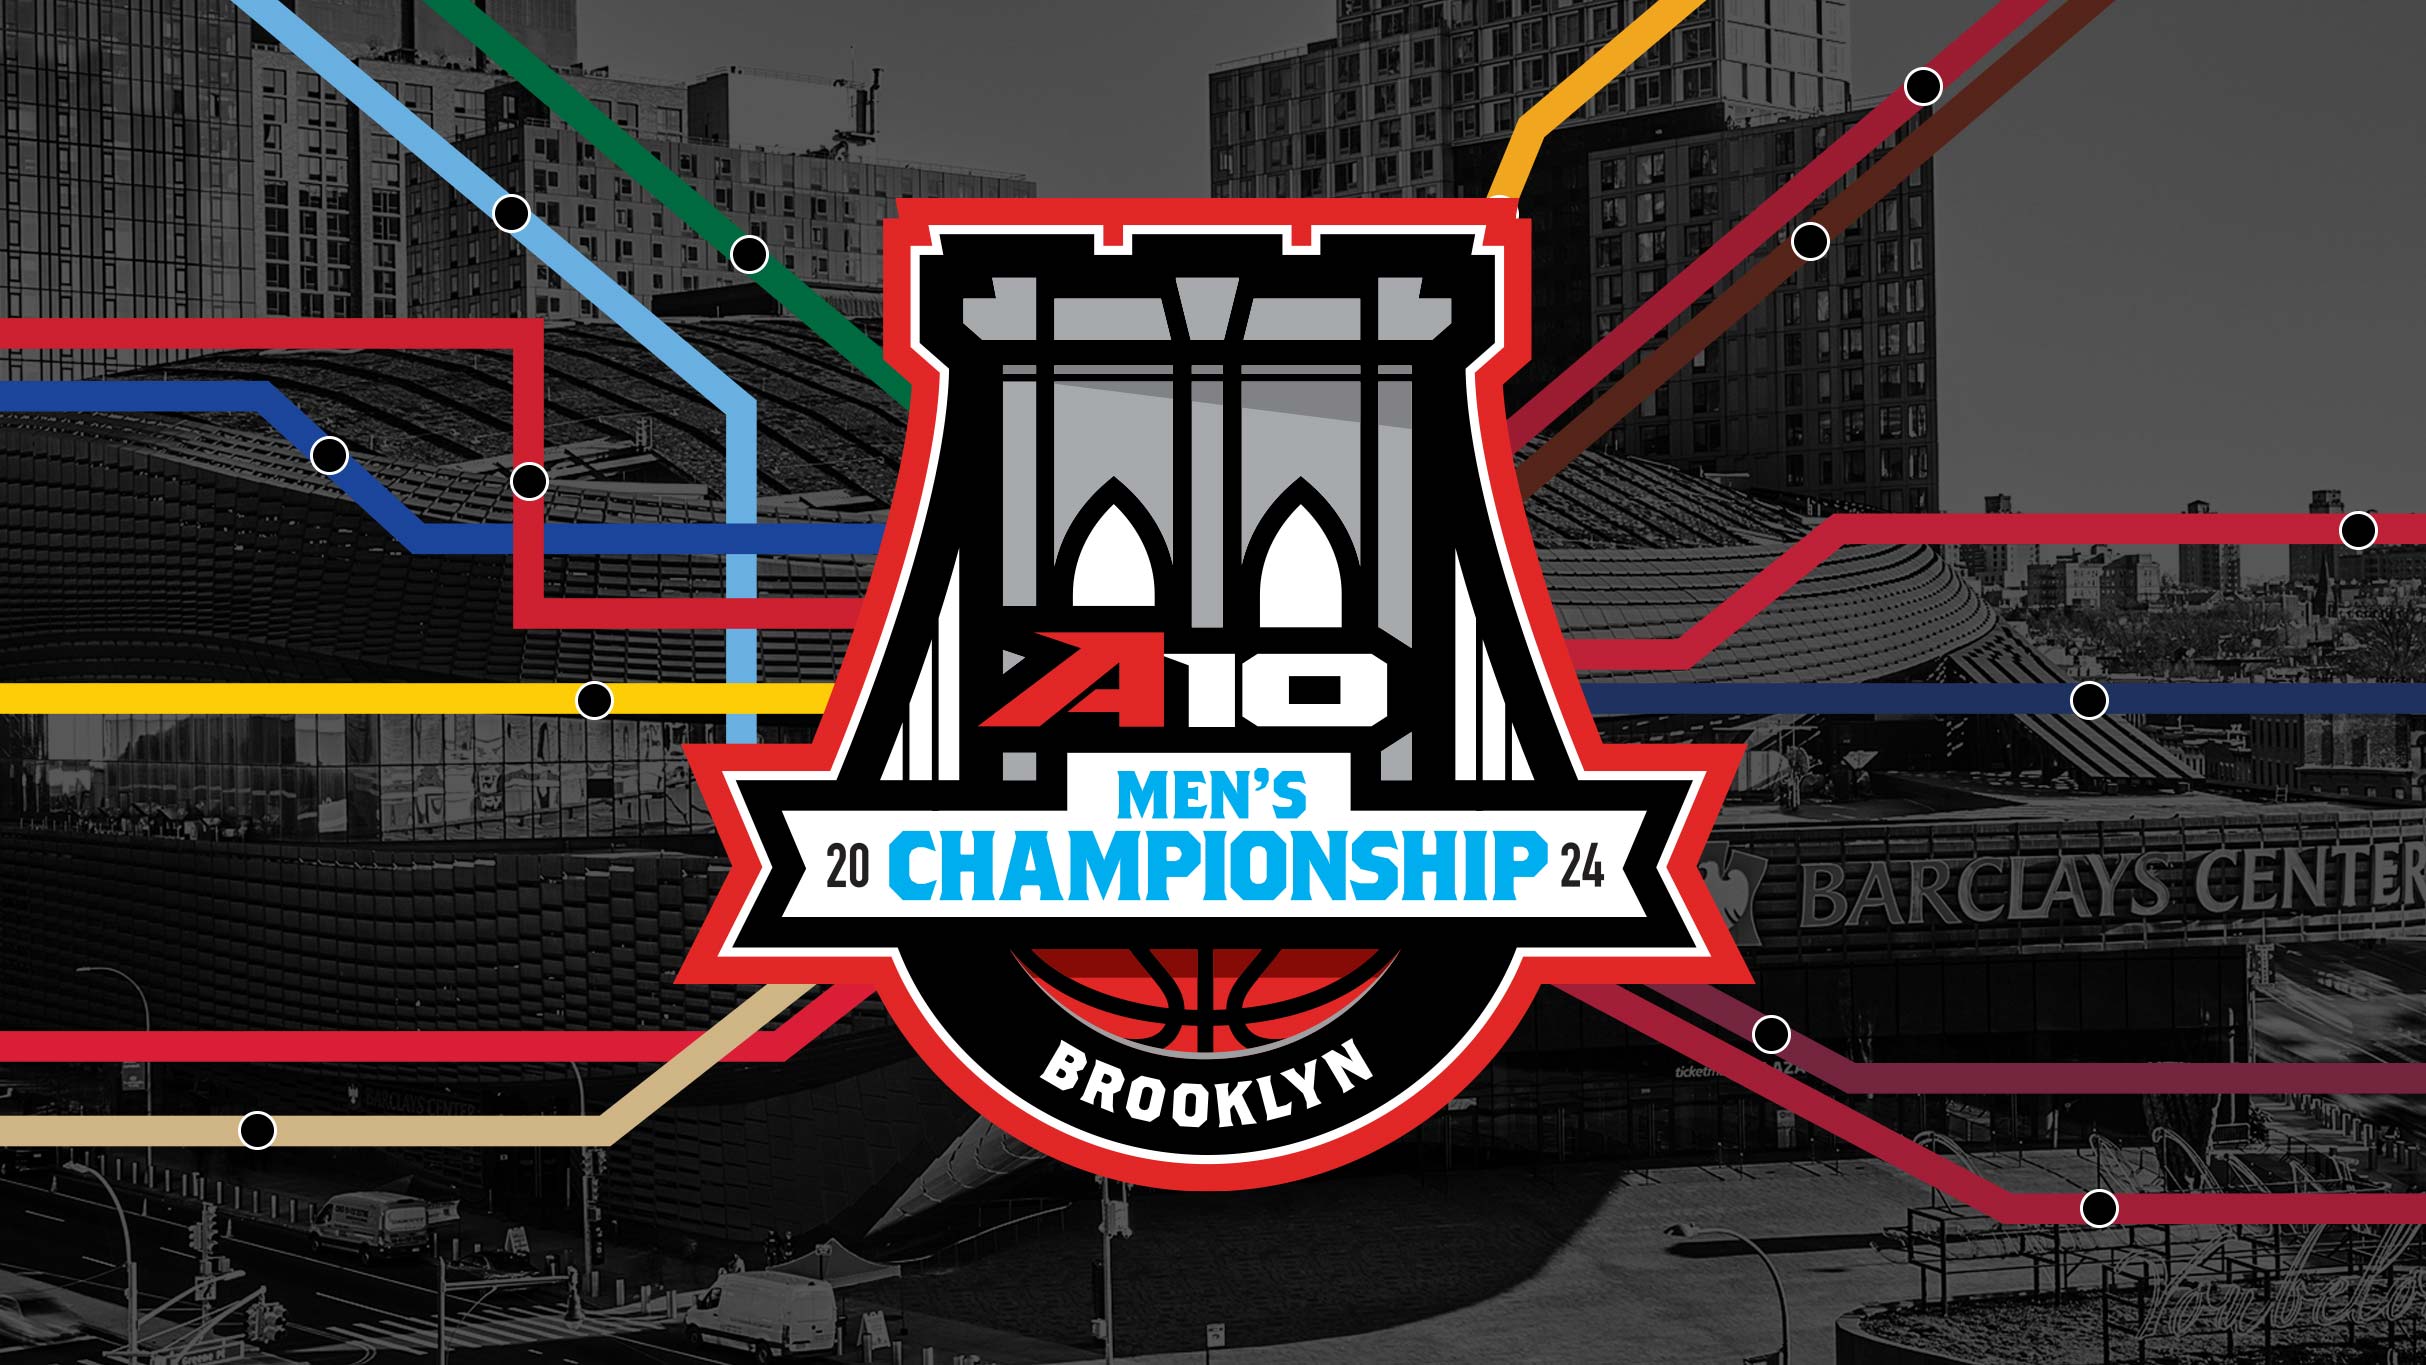 Atlantic 10 Men's Basketball Championship - Session 5 in Brooklyn promo photo for American Express® Early Access presale offer code